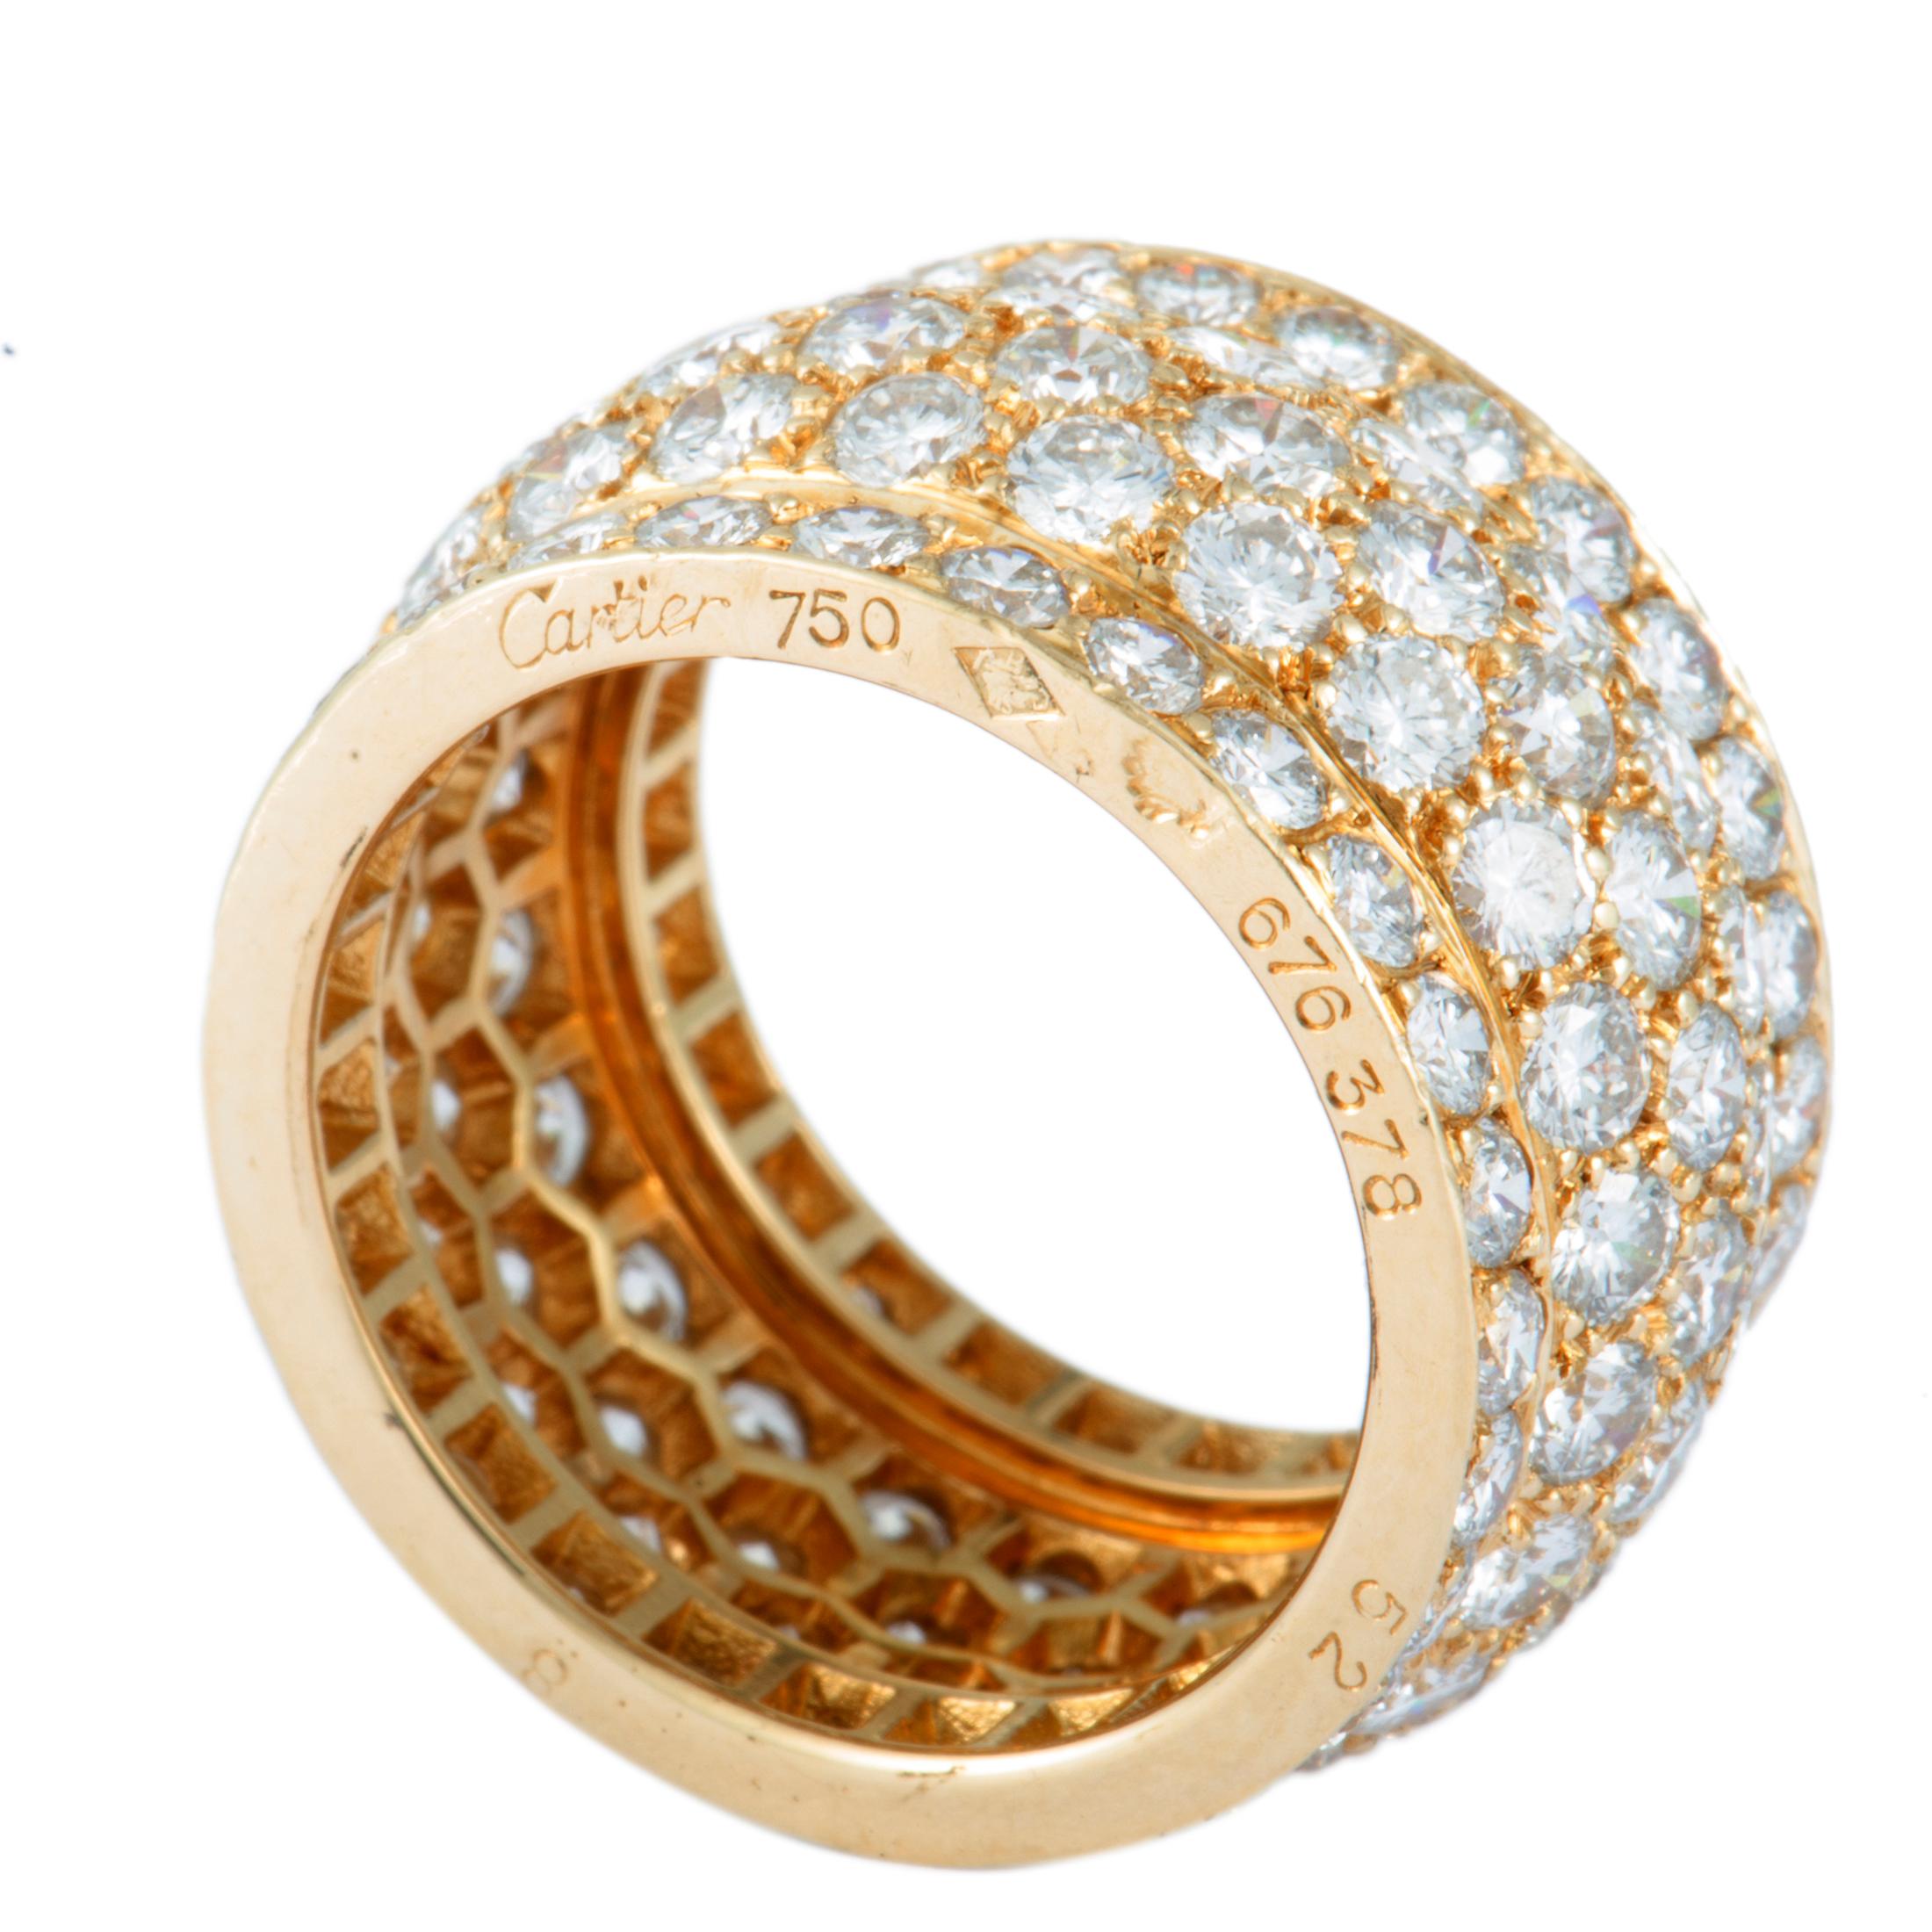 Cartier Nigeria Full Diamond Pave Wide Yellow Gold Band Ring 1